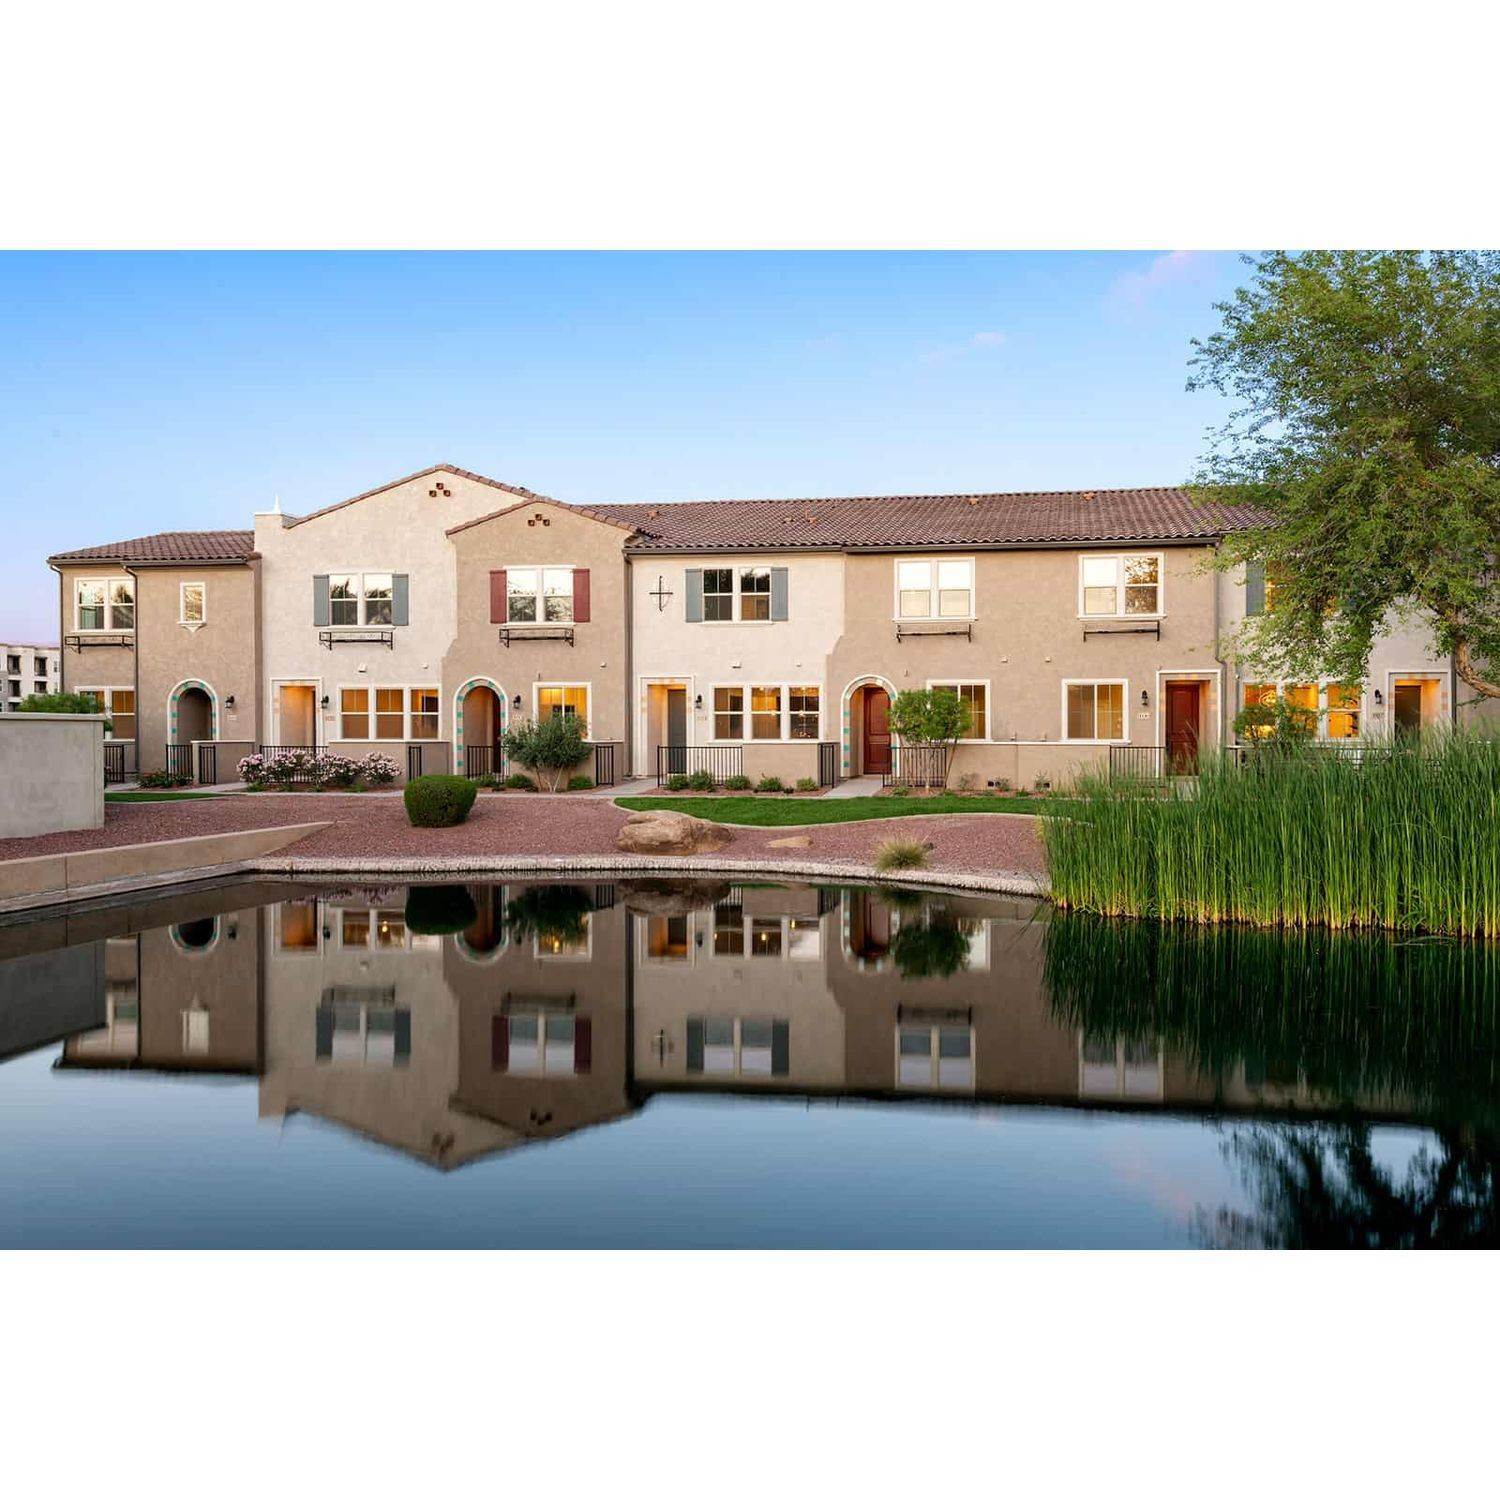 4. The Towns at Annecy byggnad vid 2660 S. Equestrian Dr. #110, Gilbert, AZ 85295